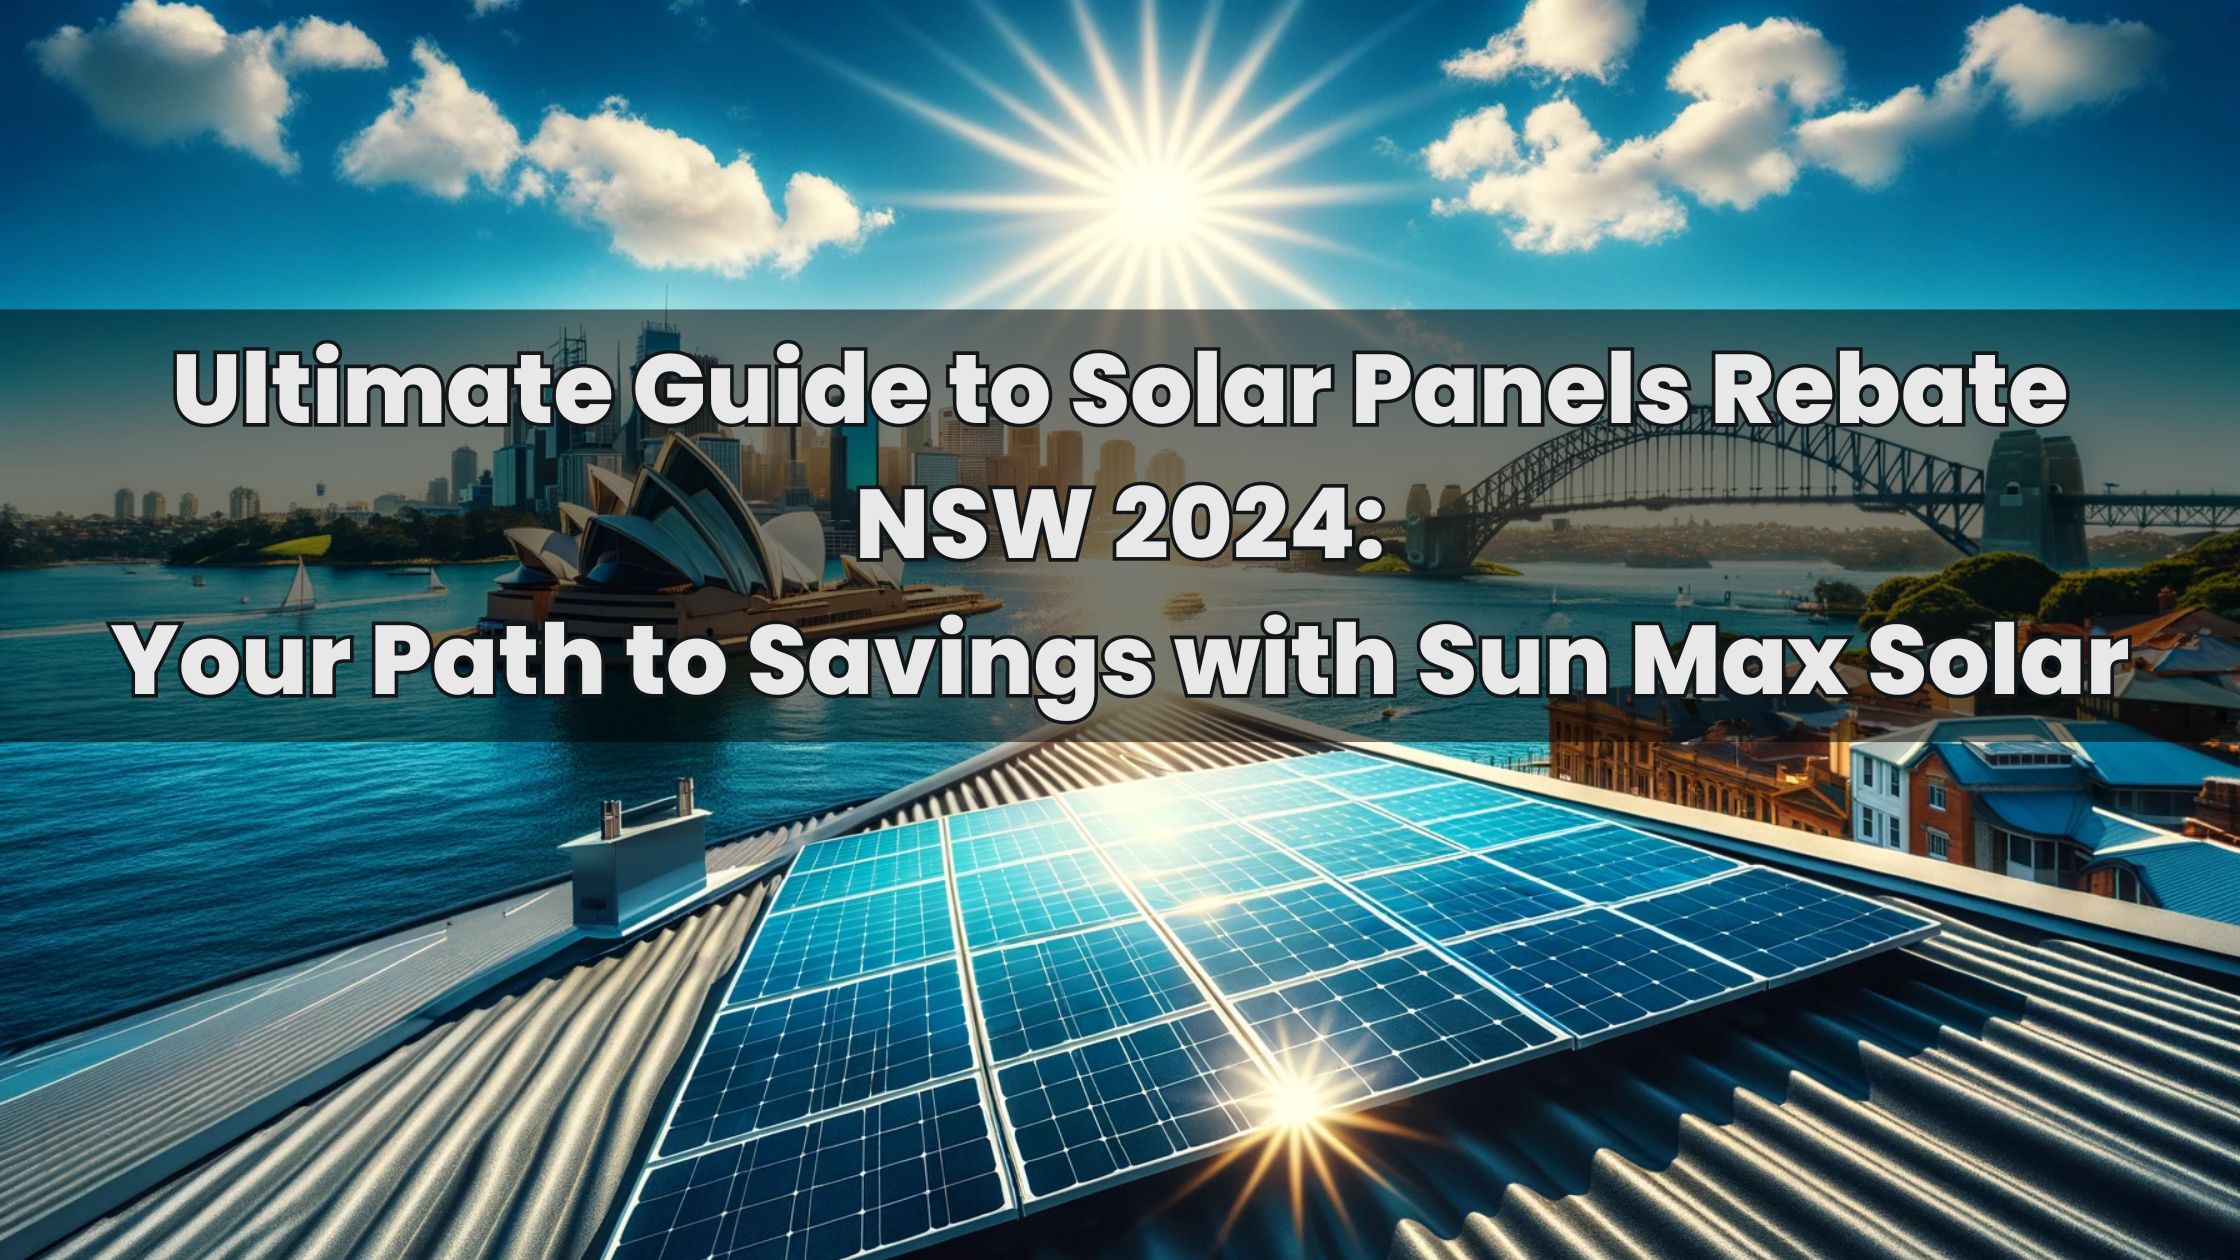 Ultimate Guide to Solar Panels Rebate NSW 2024